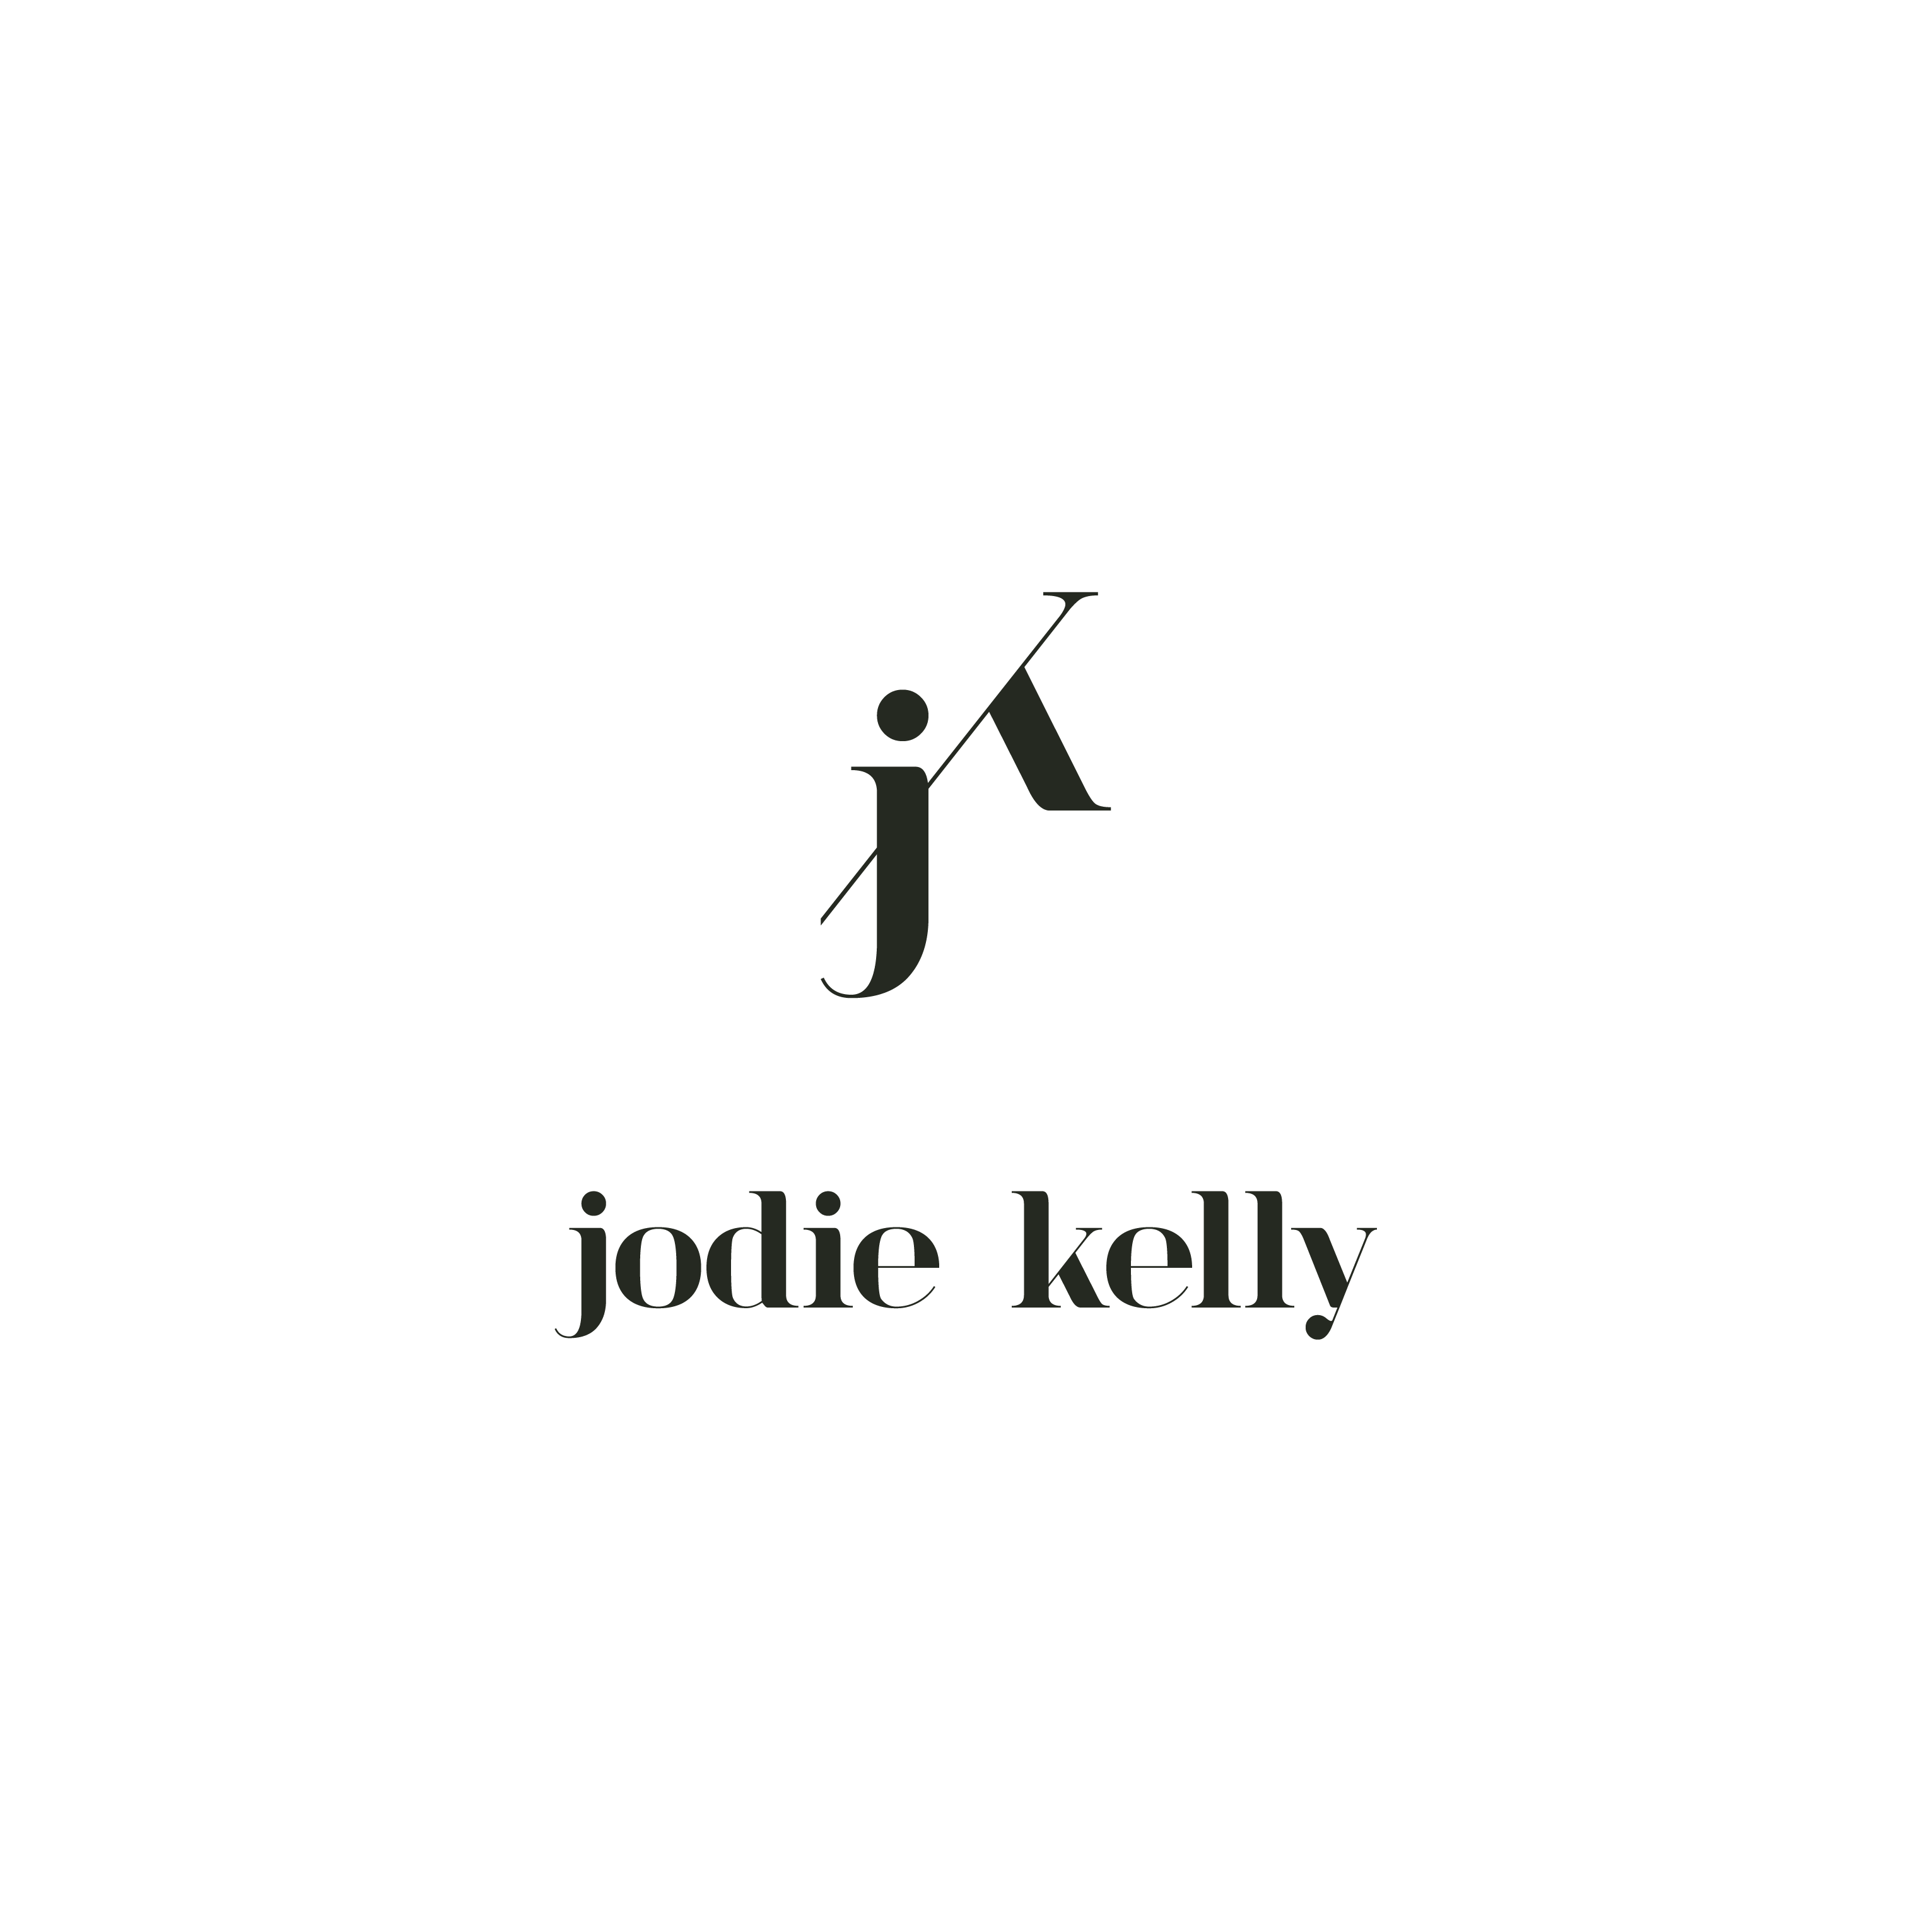 Sophisticated Logo - Elegant and sophisticated logo design for Jodie Kelly Photography, a